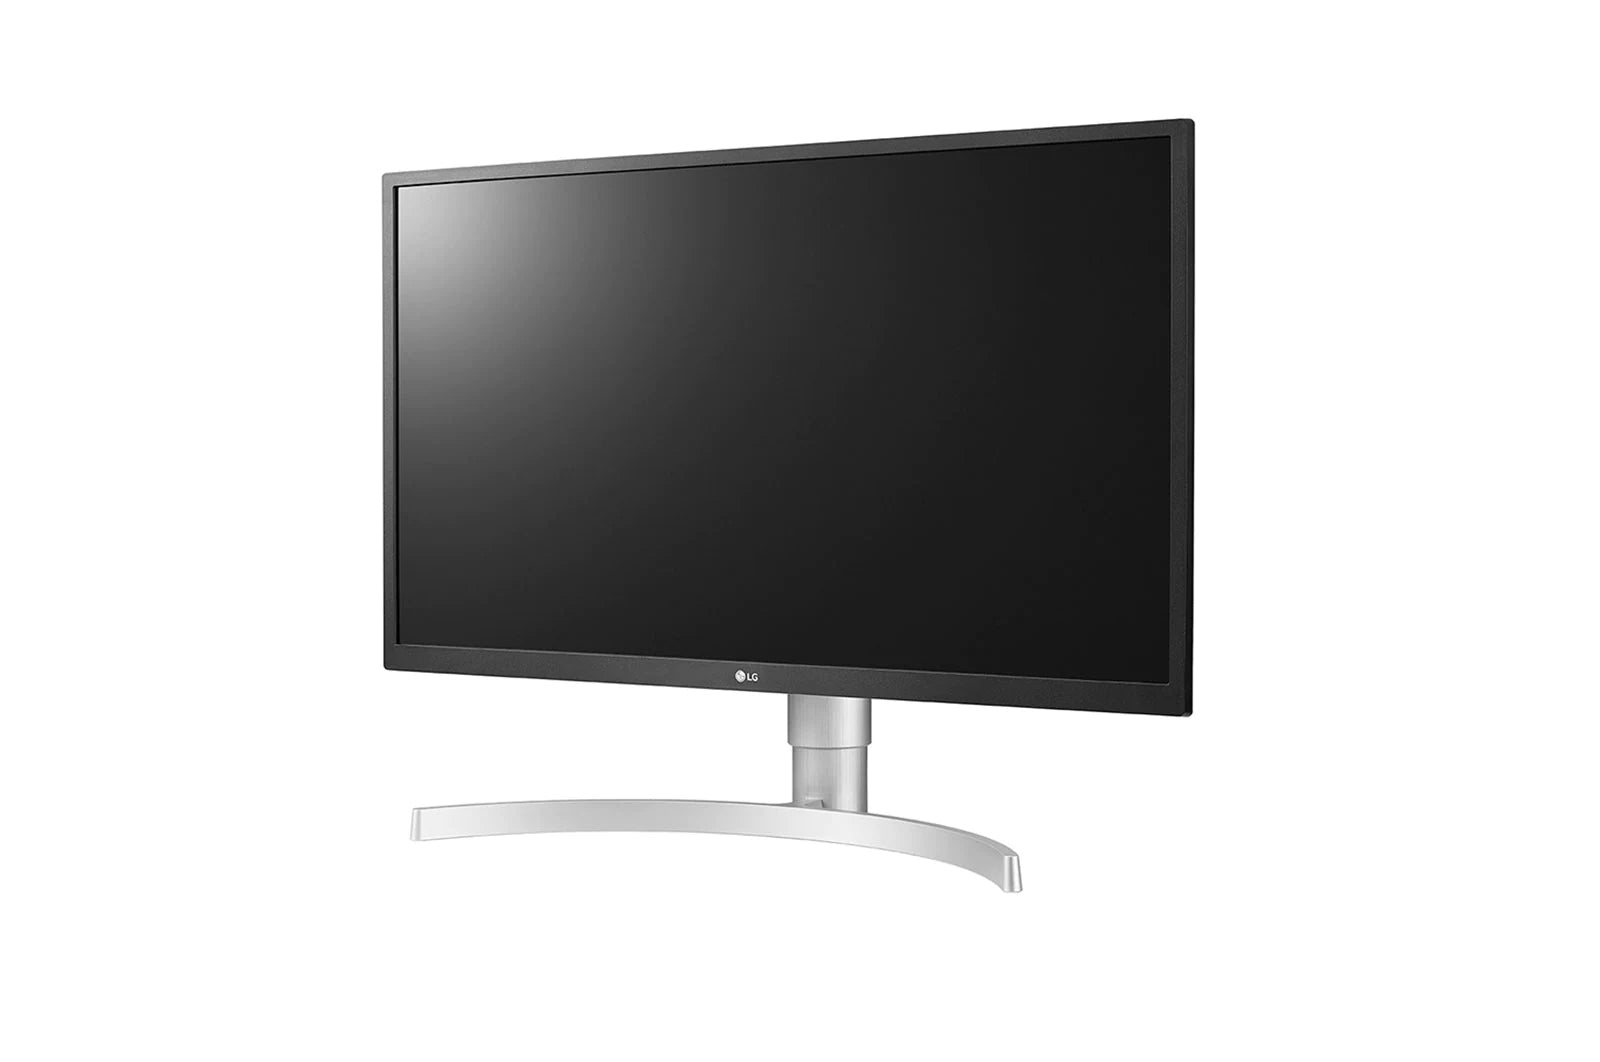 LG 27” Class 4K UHD IPS LED HDR With Ergonomic Stand Monitor (27” Diagonal)